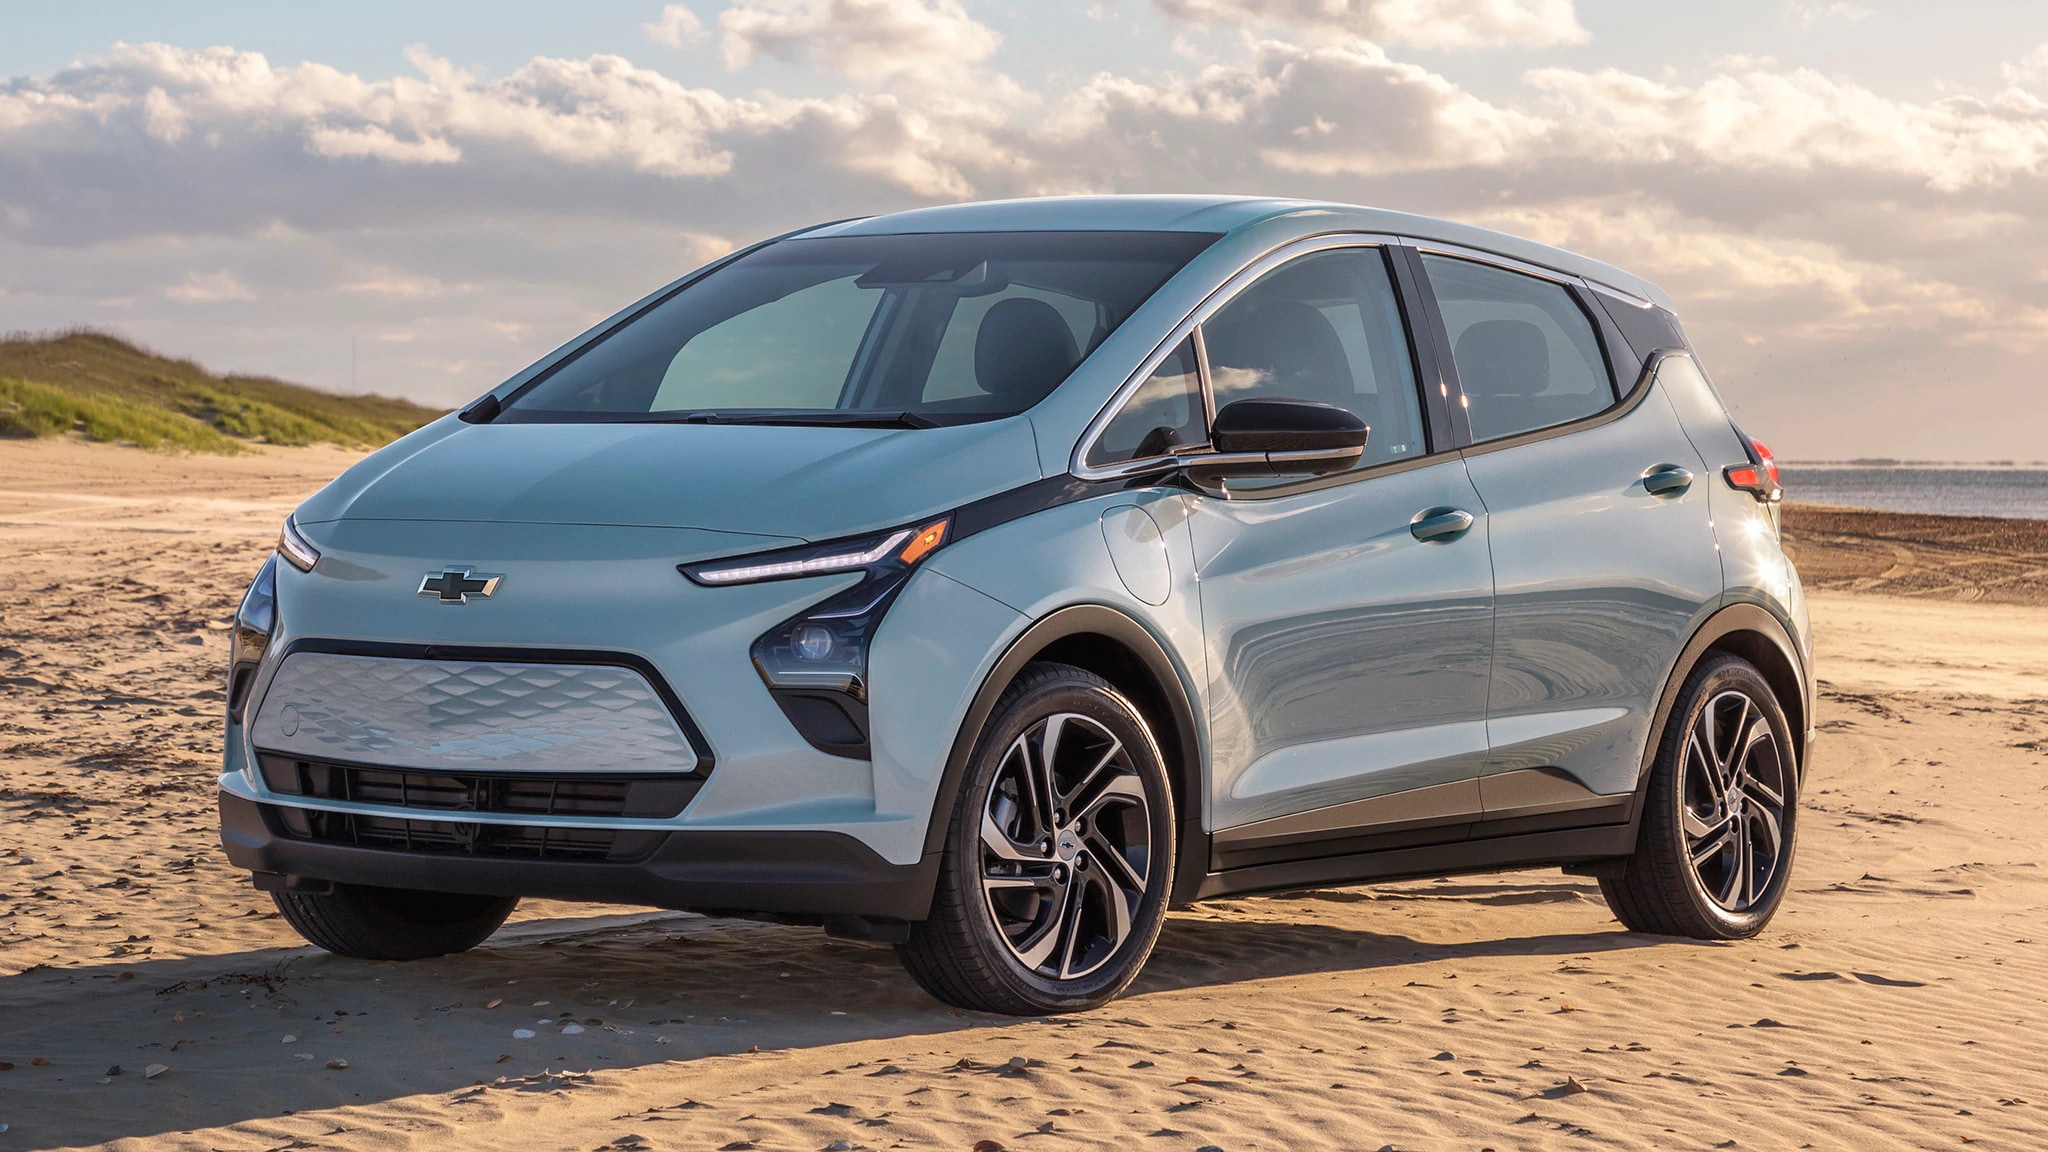 2022 Chevy Bolt wins US News EV of the year